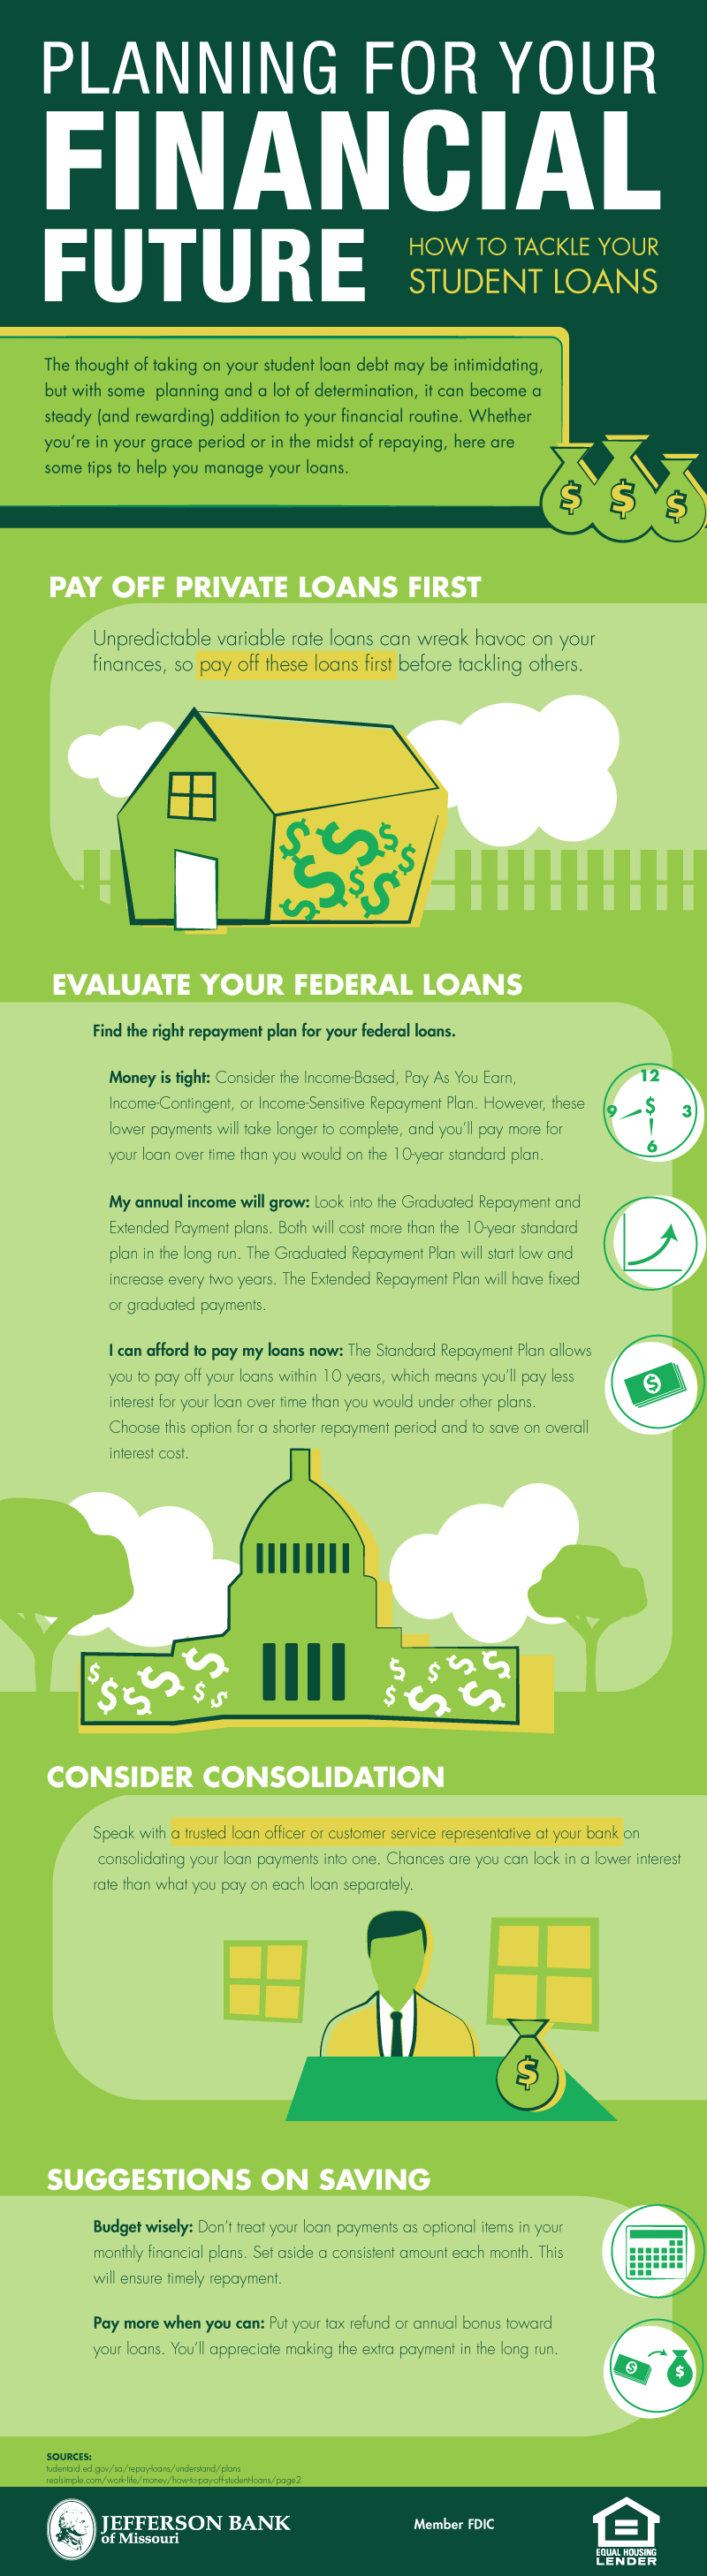 Infographic-How to tackle your student loans